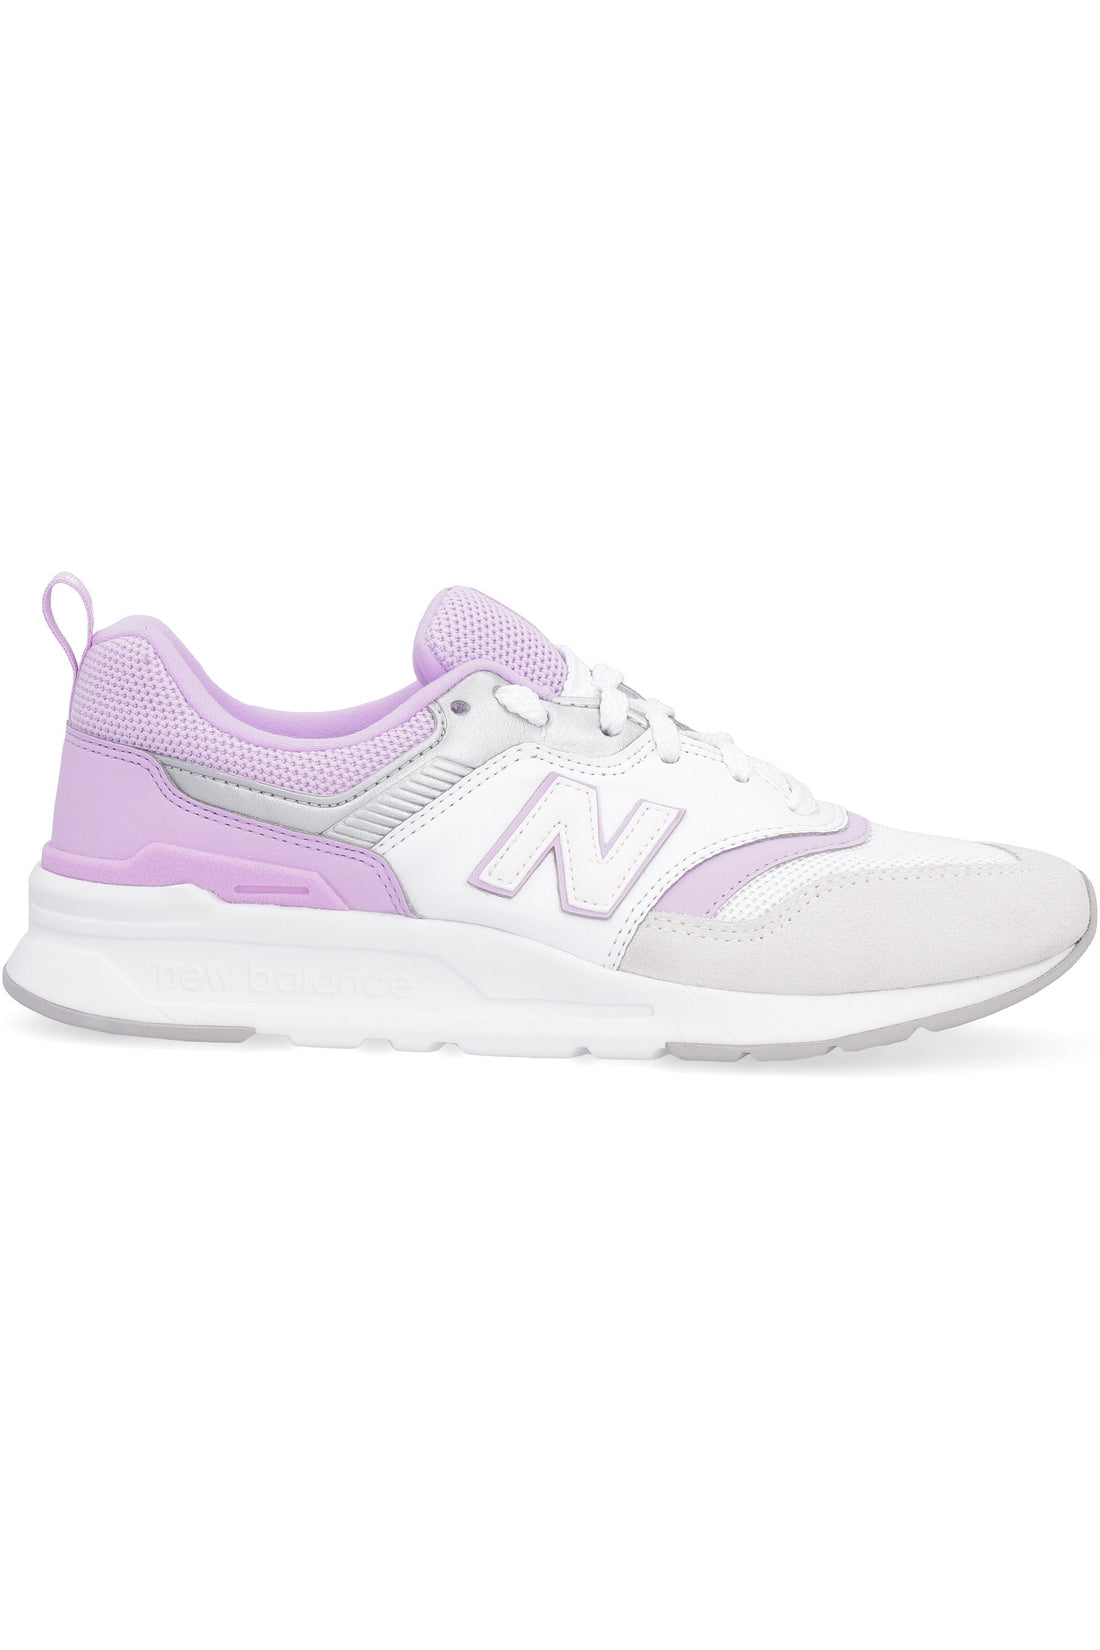 New Balance-OUTLET-SALE-997 suede and mesh sneakers-ARCHIVIST